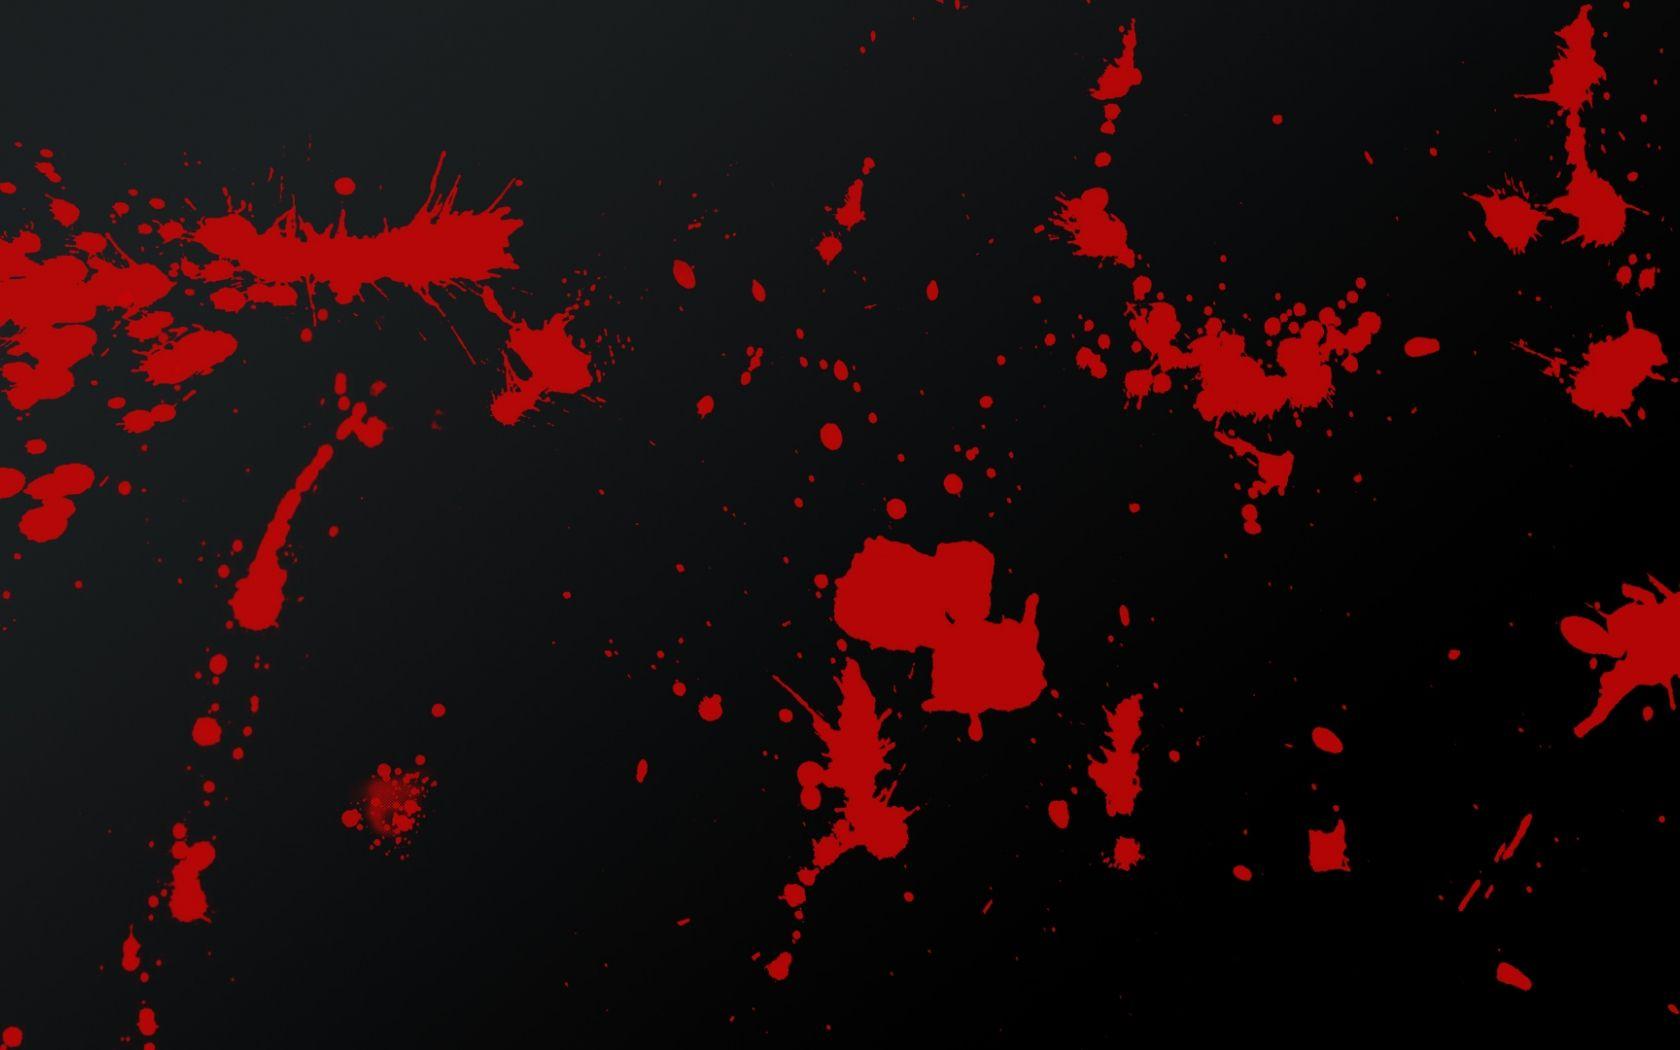 Aggregate 83+ blood dripping wallpaper latest - in.cdgdbentre